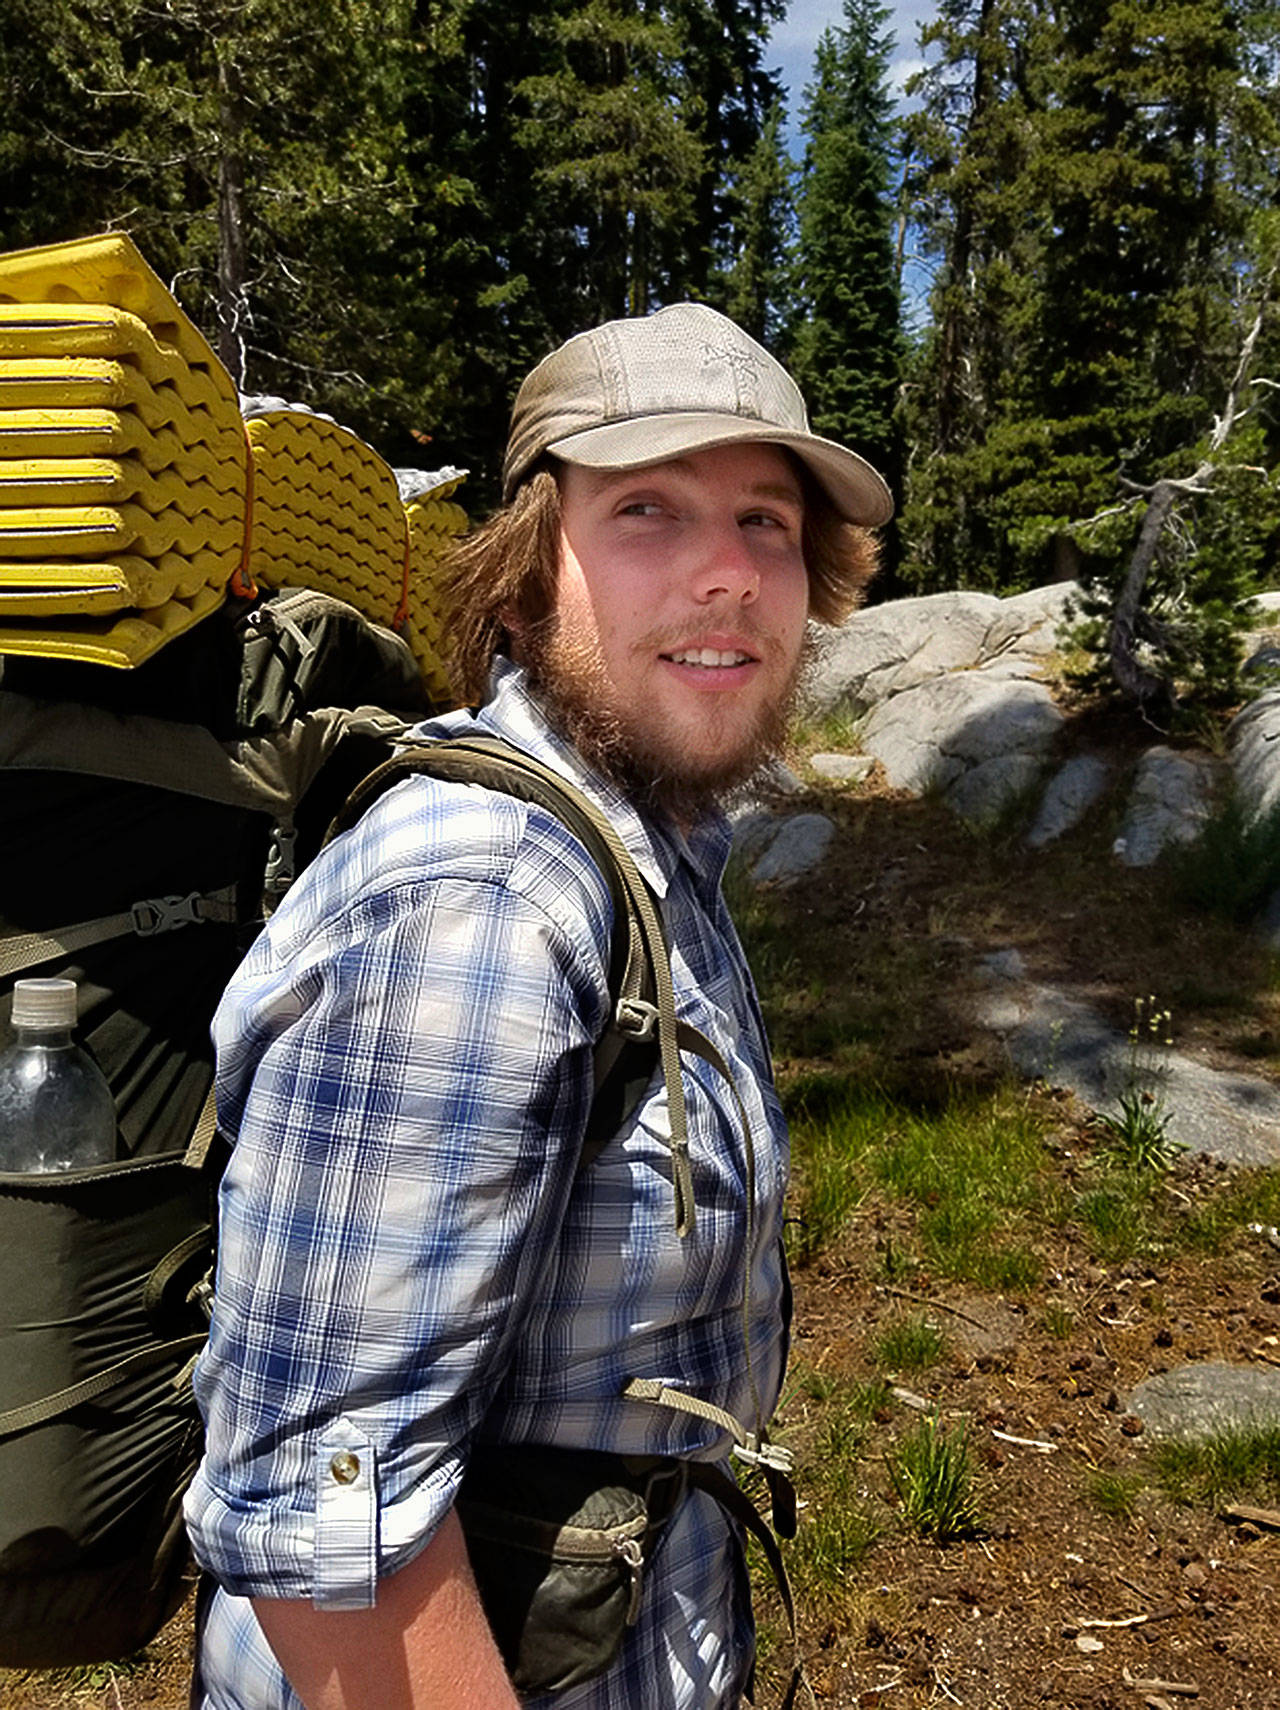 On Pacific Crest Trail, some days golden, other times down | HeraldNet.com